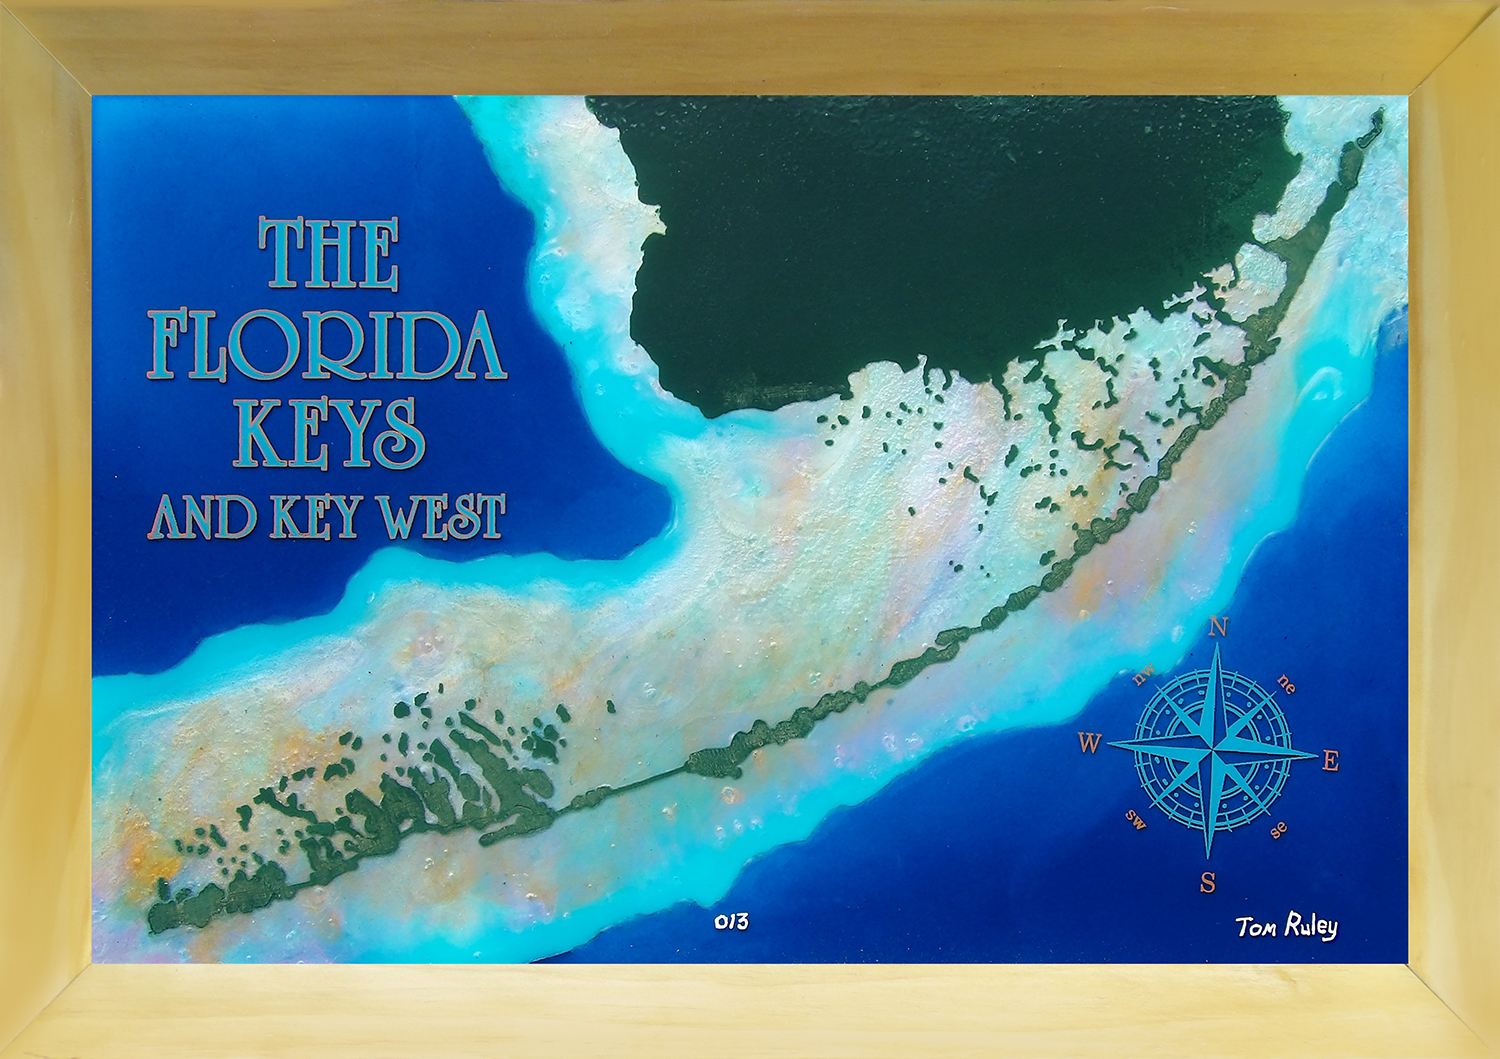 3-D Framed Screenprinted and Epoxy Resin Art of The Florida Keys and Key West